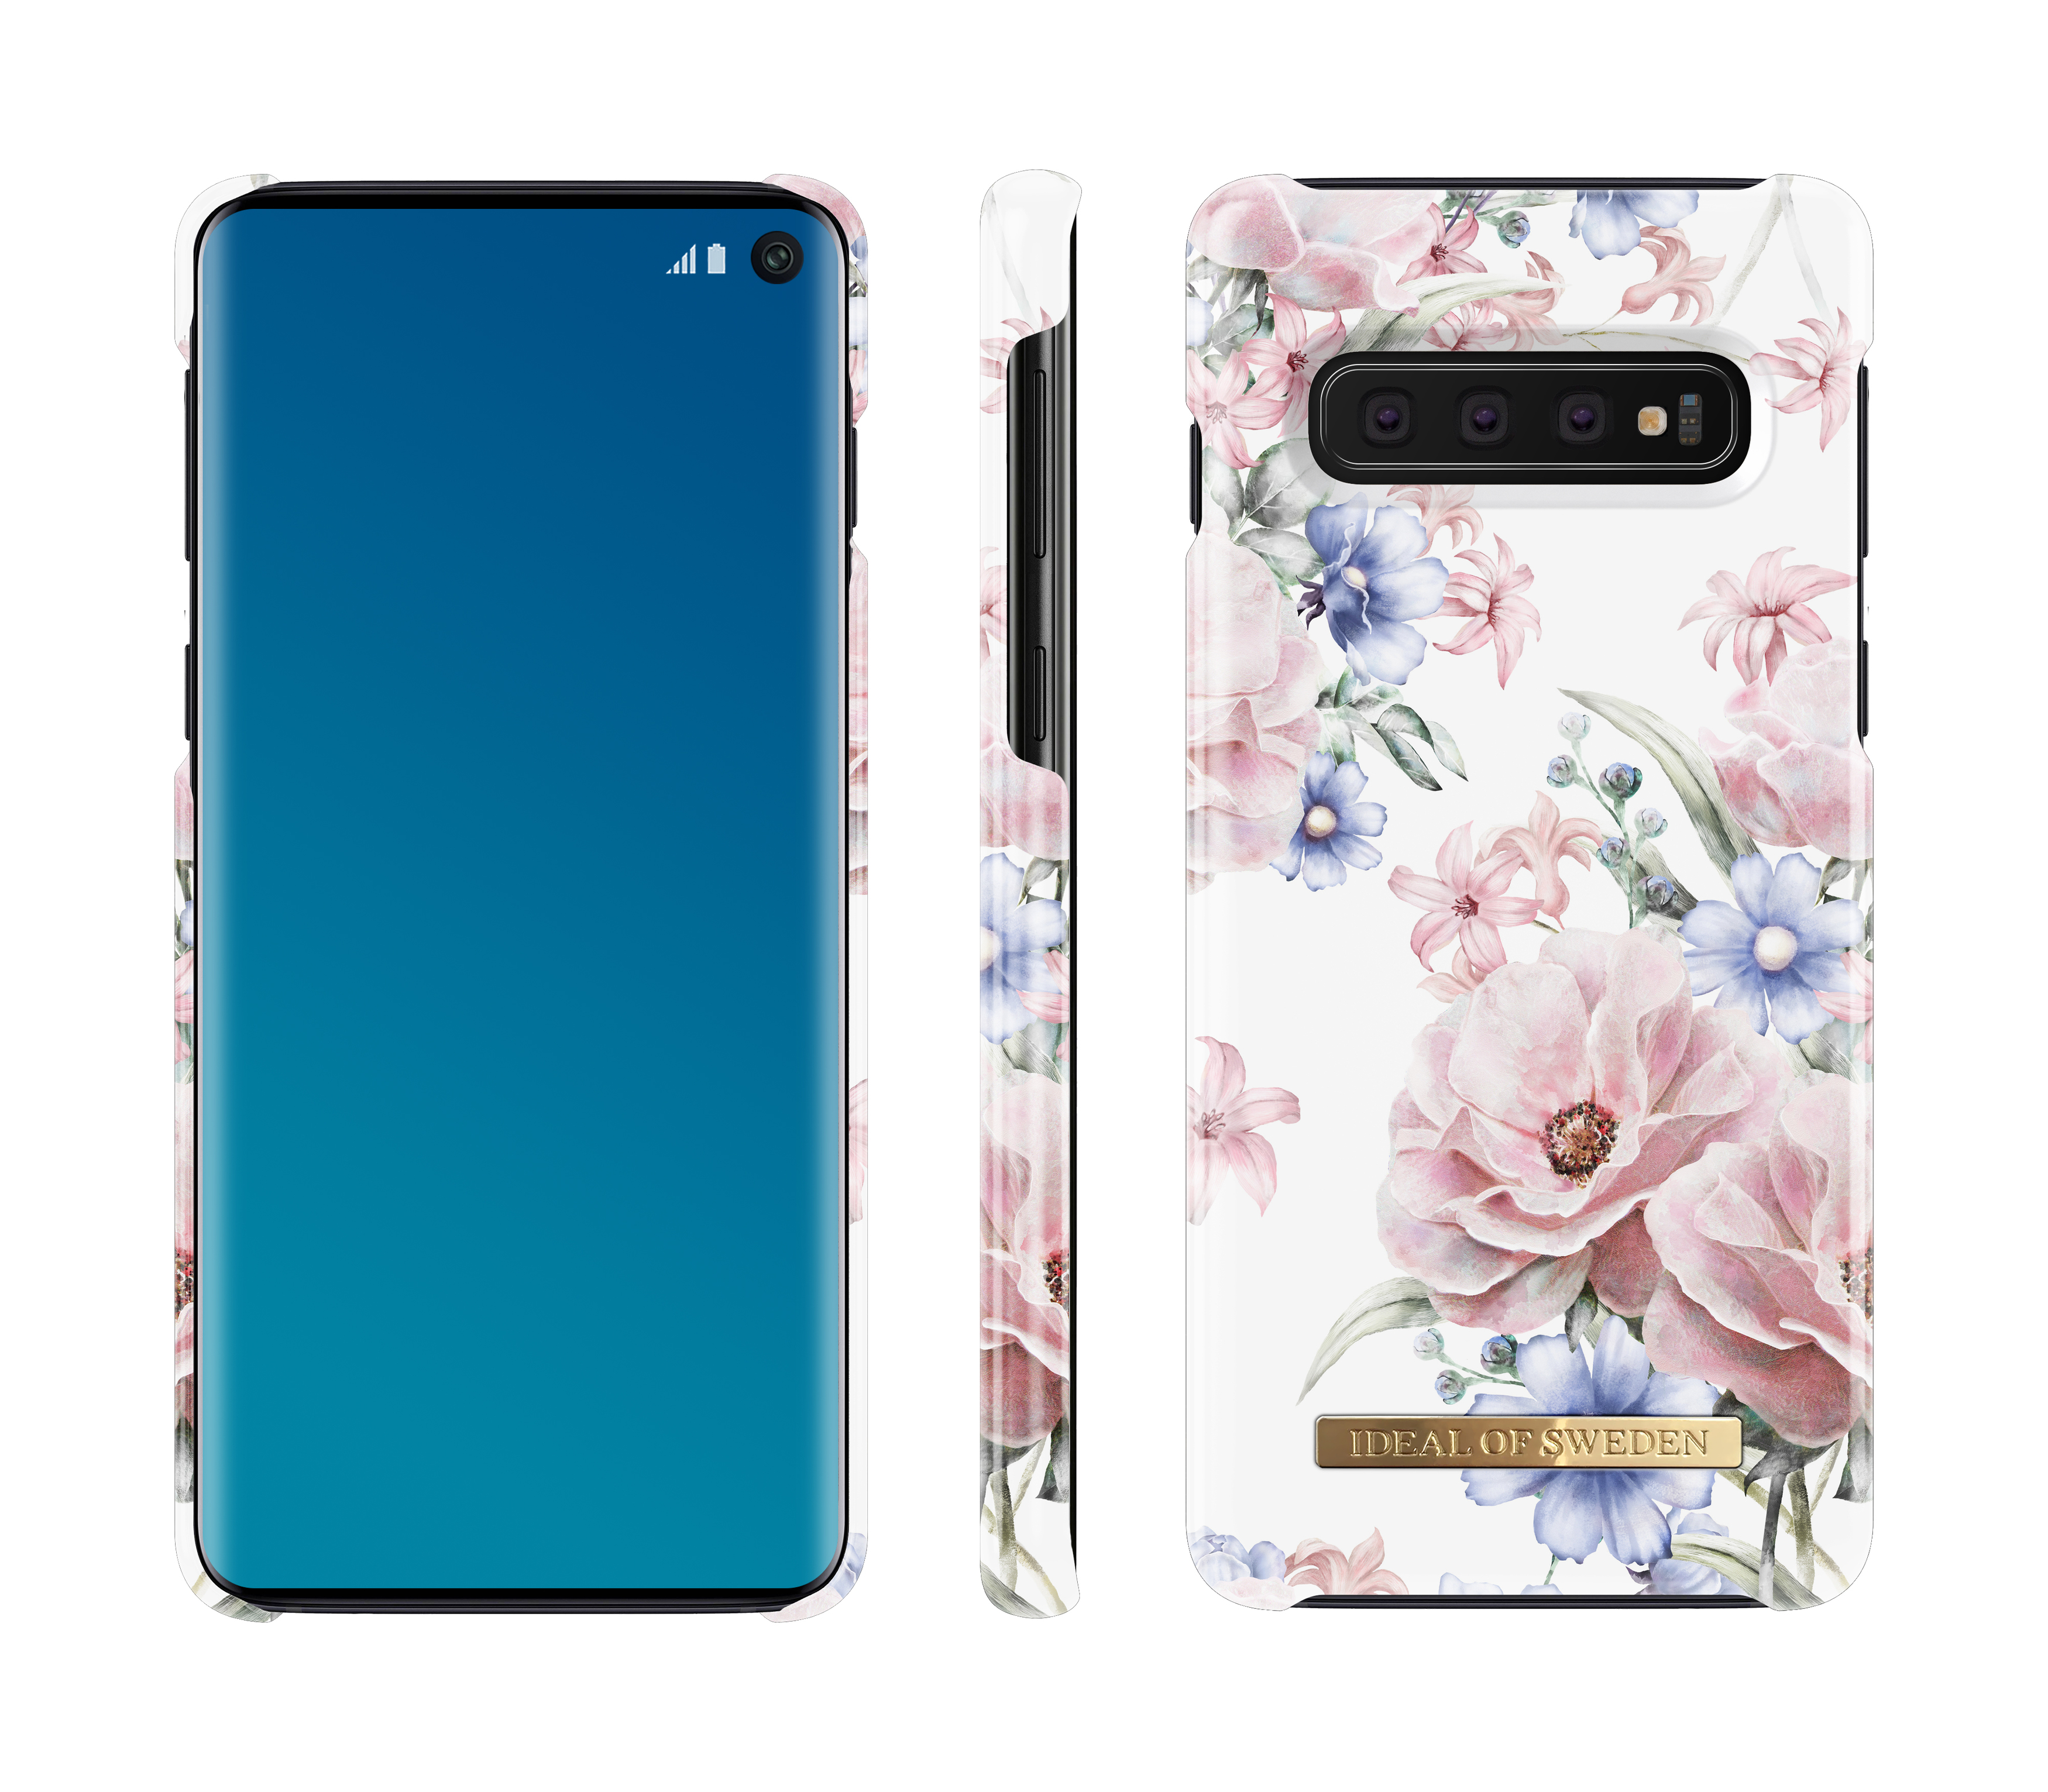 IDEAL Backcover, OF Galaxy S10, Samsung, SWEDEN Floral Romance Fashion,